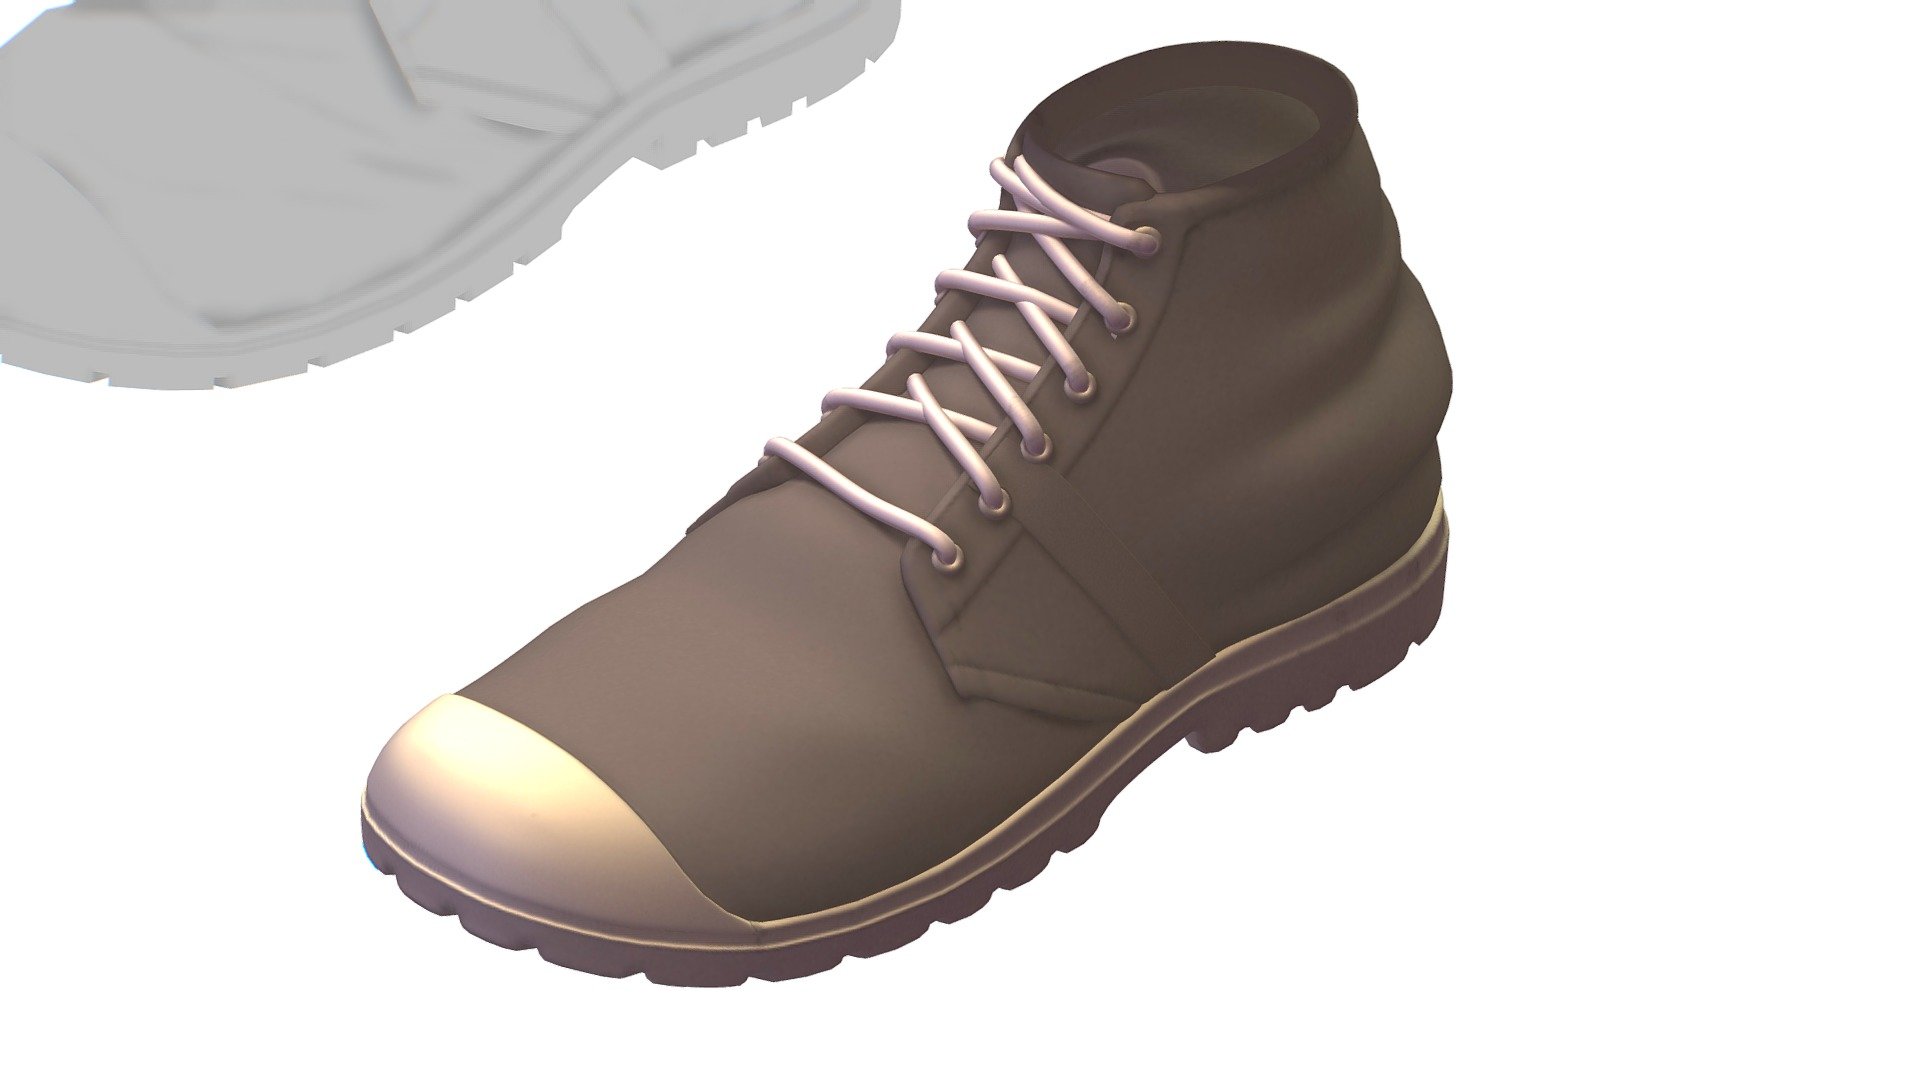 Cartoon High Poly Subdivision Beige Sneakers

No HDRI map, No Light, No material settings - only Diffuse/Color Map Texture (3000x3000) 

More information about the 3D model: please use the Sketchfab Model Inspector - Key (i) - Cartoon High Poly Subdivision Beige Sneakers - Buy Royalty Free 3D model by Oleg Shuldiakov (@olegshuldiakov) 3d model